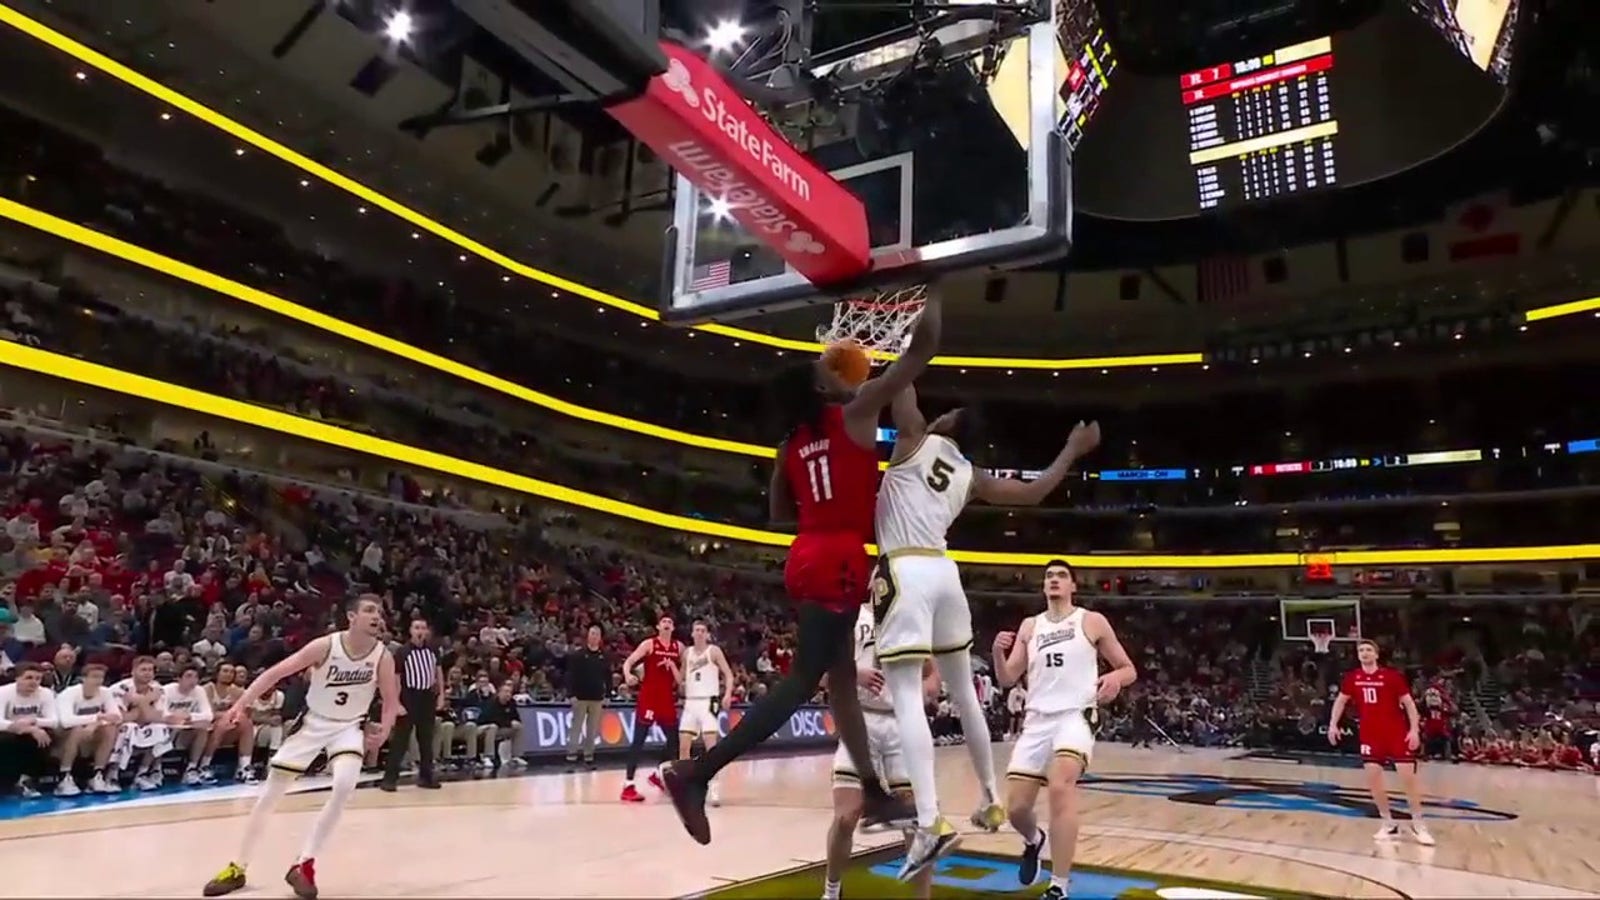 Rutgers' Clifford Omoruyi drops a one-handed reverse dunk against Purdue